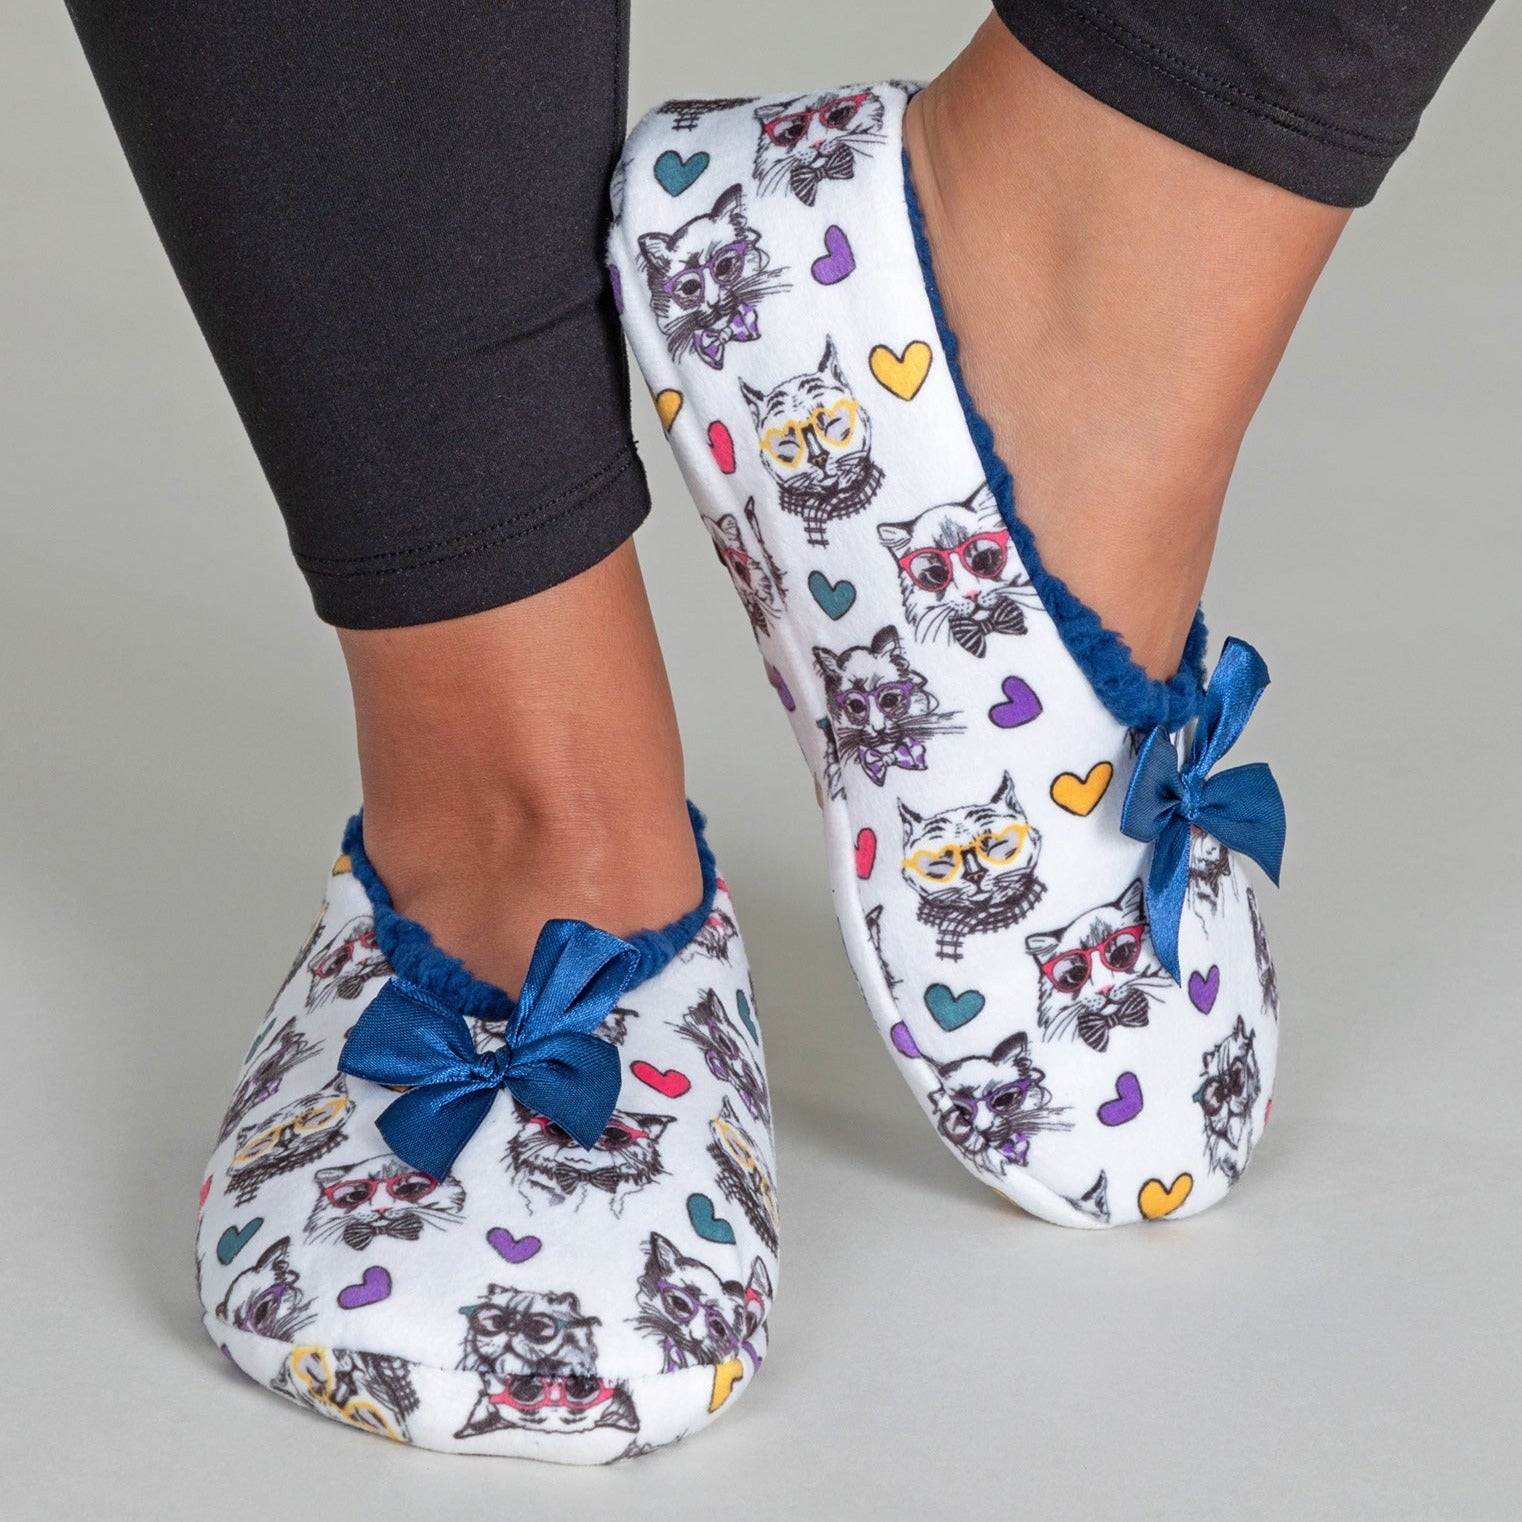 Super Cozy™ Pawsitively Adorable Paw Slippers - Cat - S/M